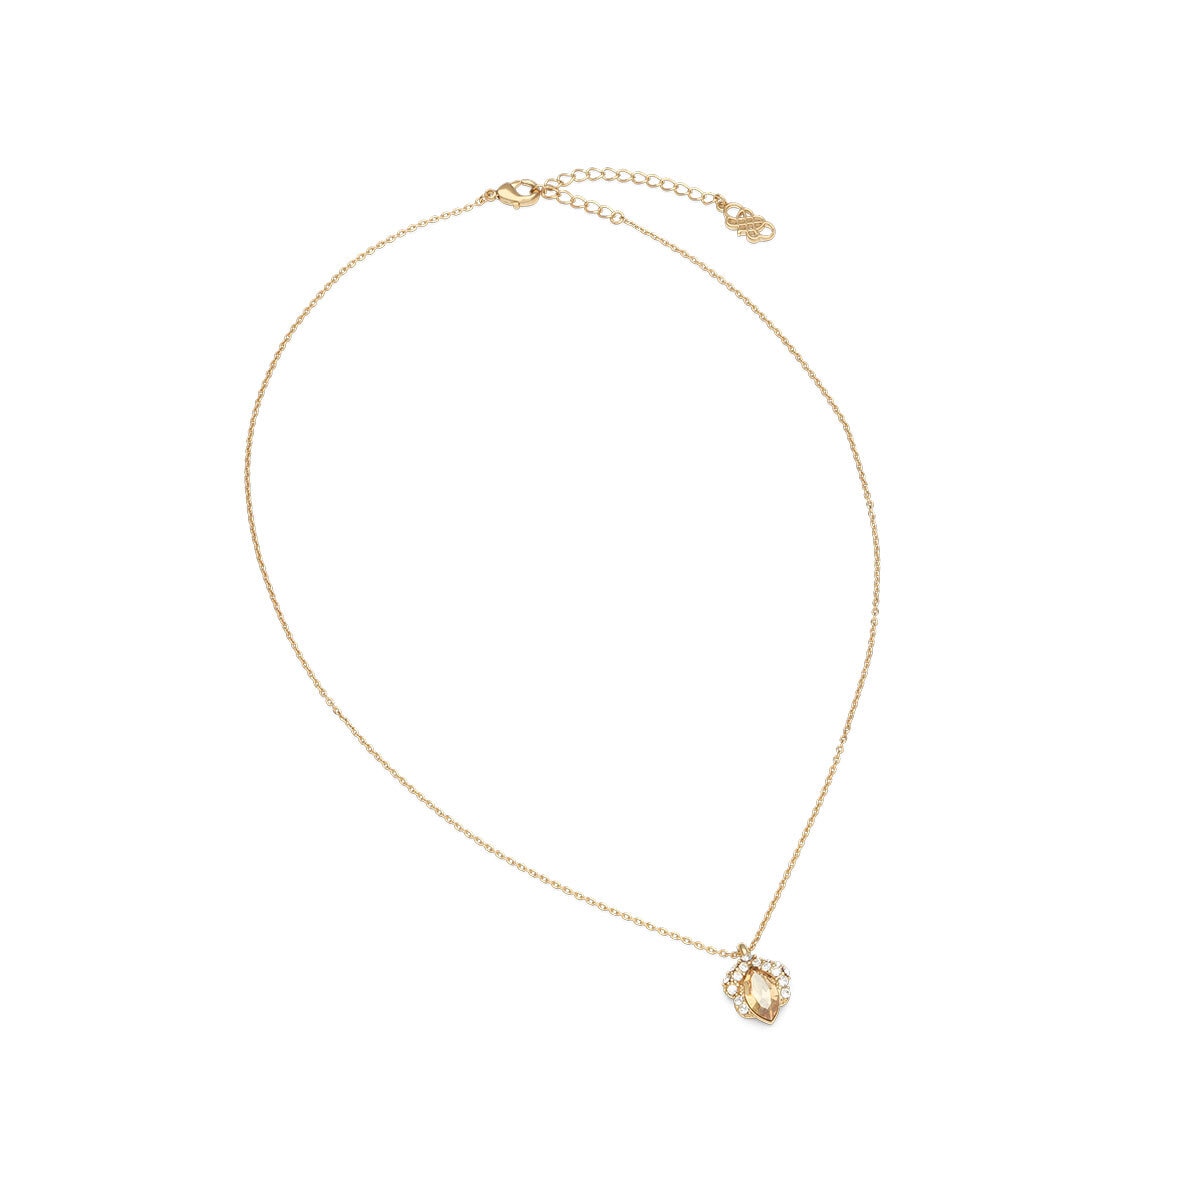 Petite Camille necklace - Golden shadow